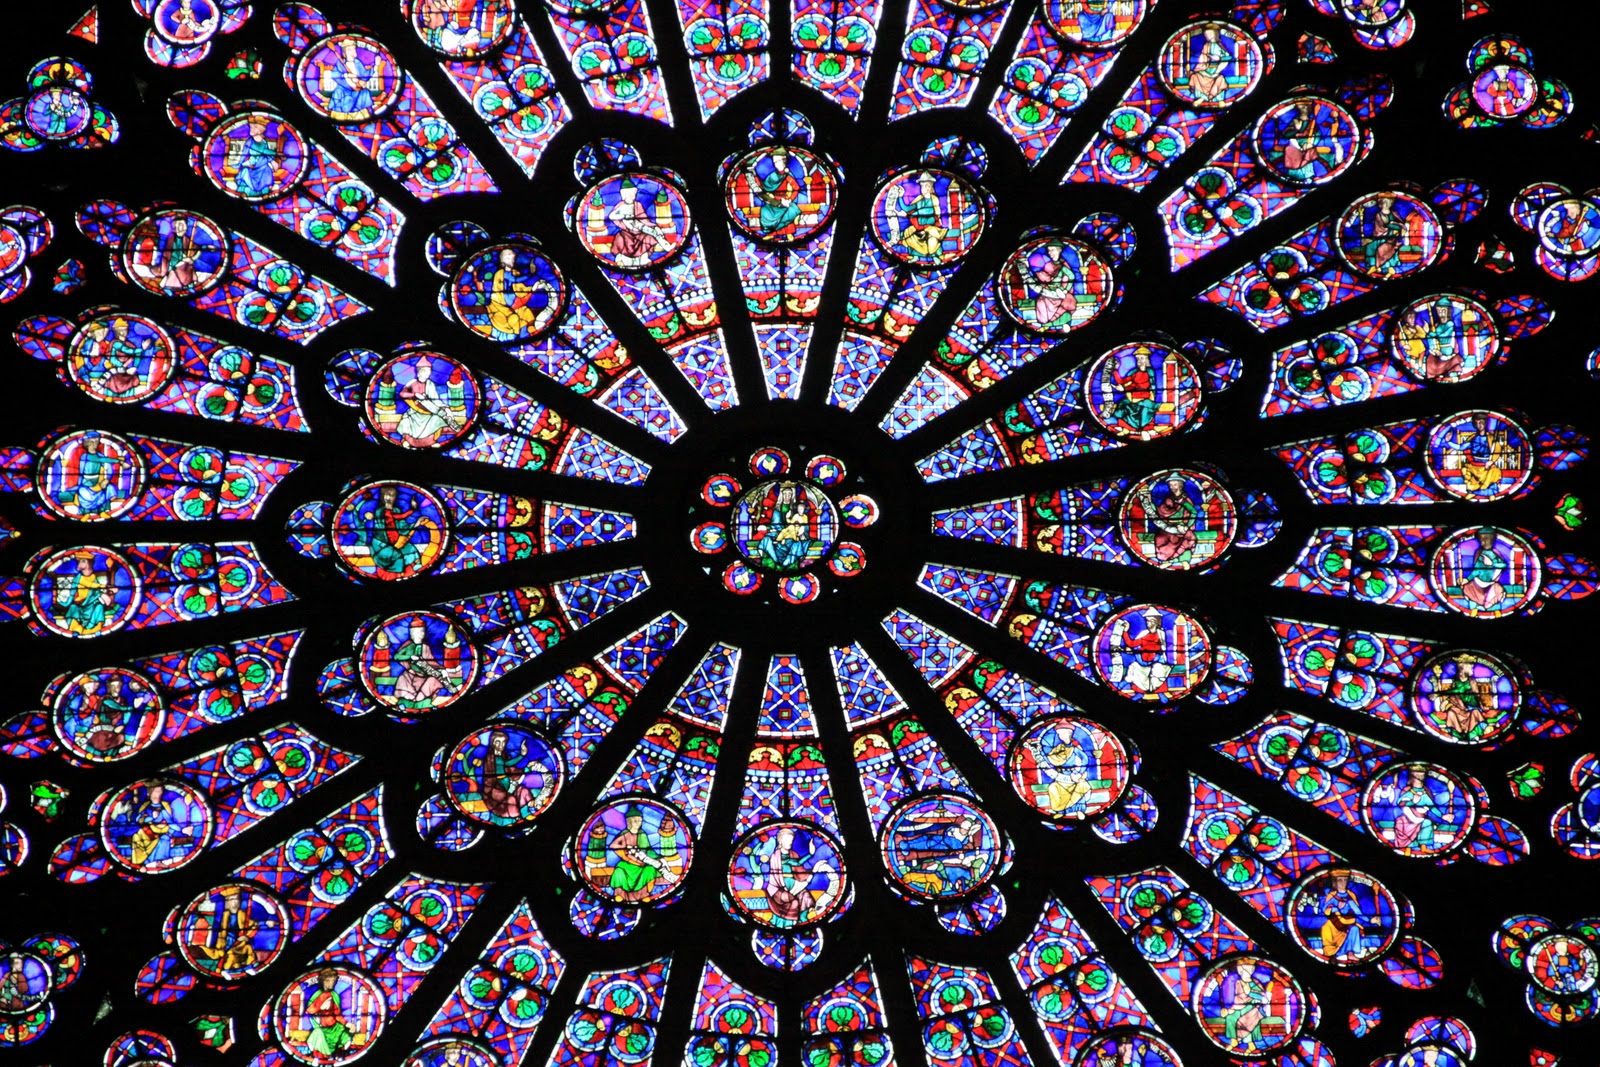 religious, notre dame de paris, cathedral, colors, design, stained glass, cathedrals cell phone wallpapers